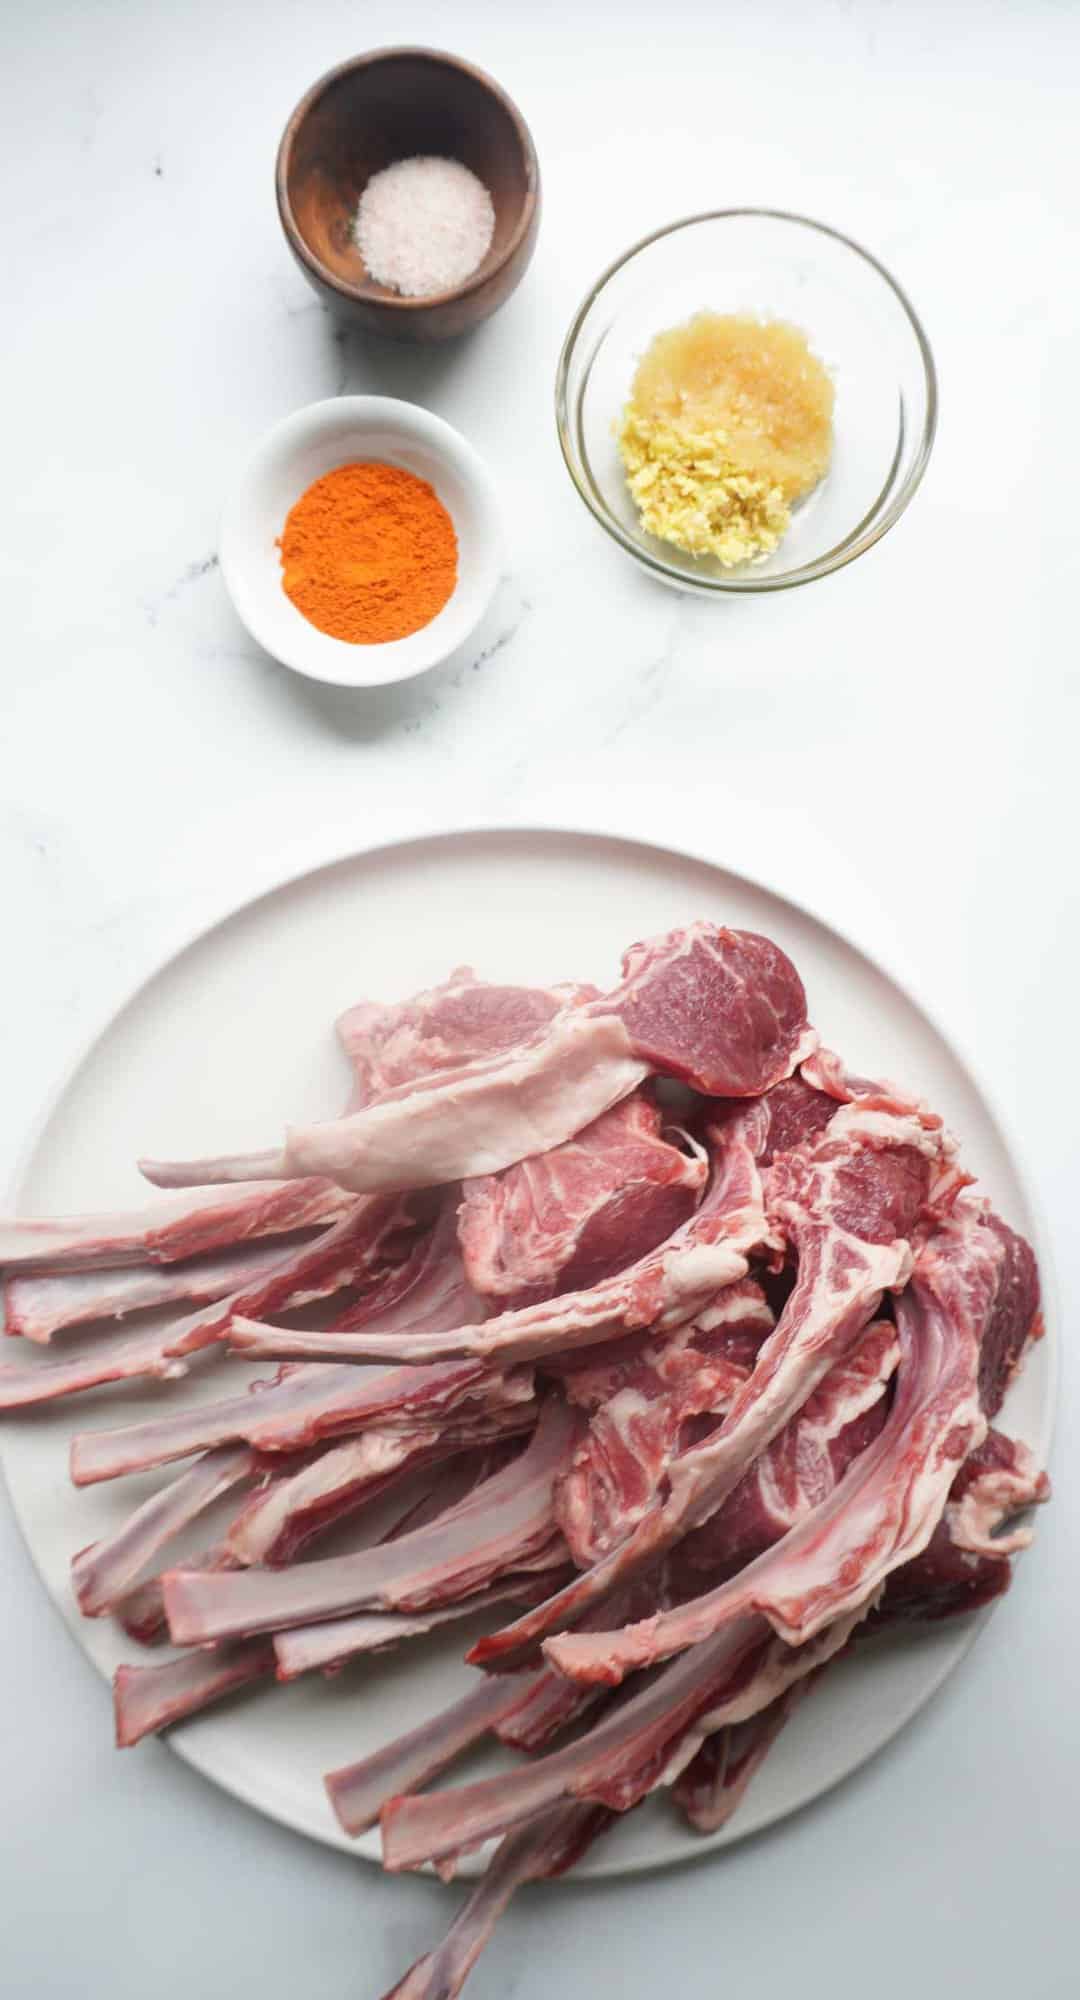 Ingredients for masala chops. A plate full of uncooked lamb chops with bowls of ginger, garlic, pink salt and red chili powder.